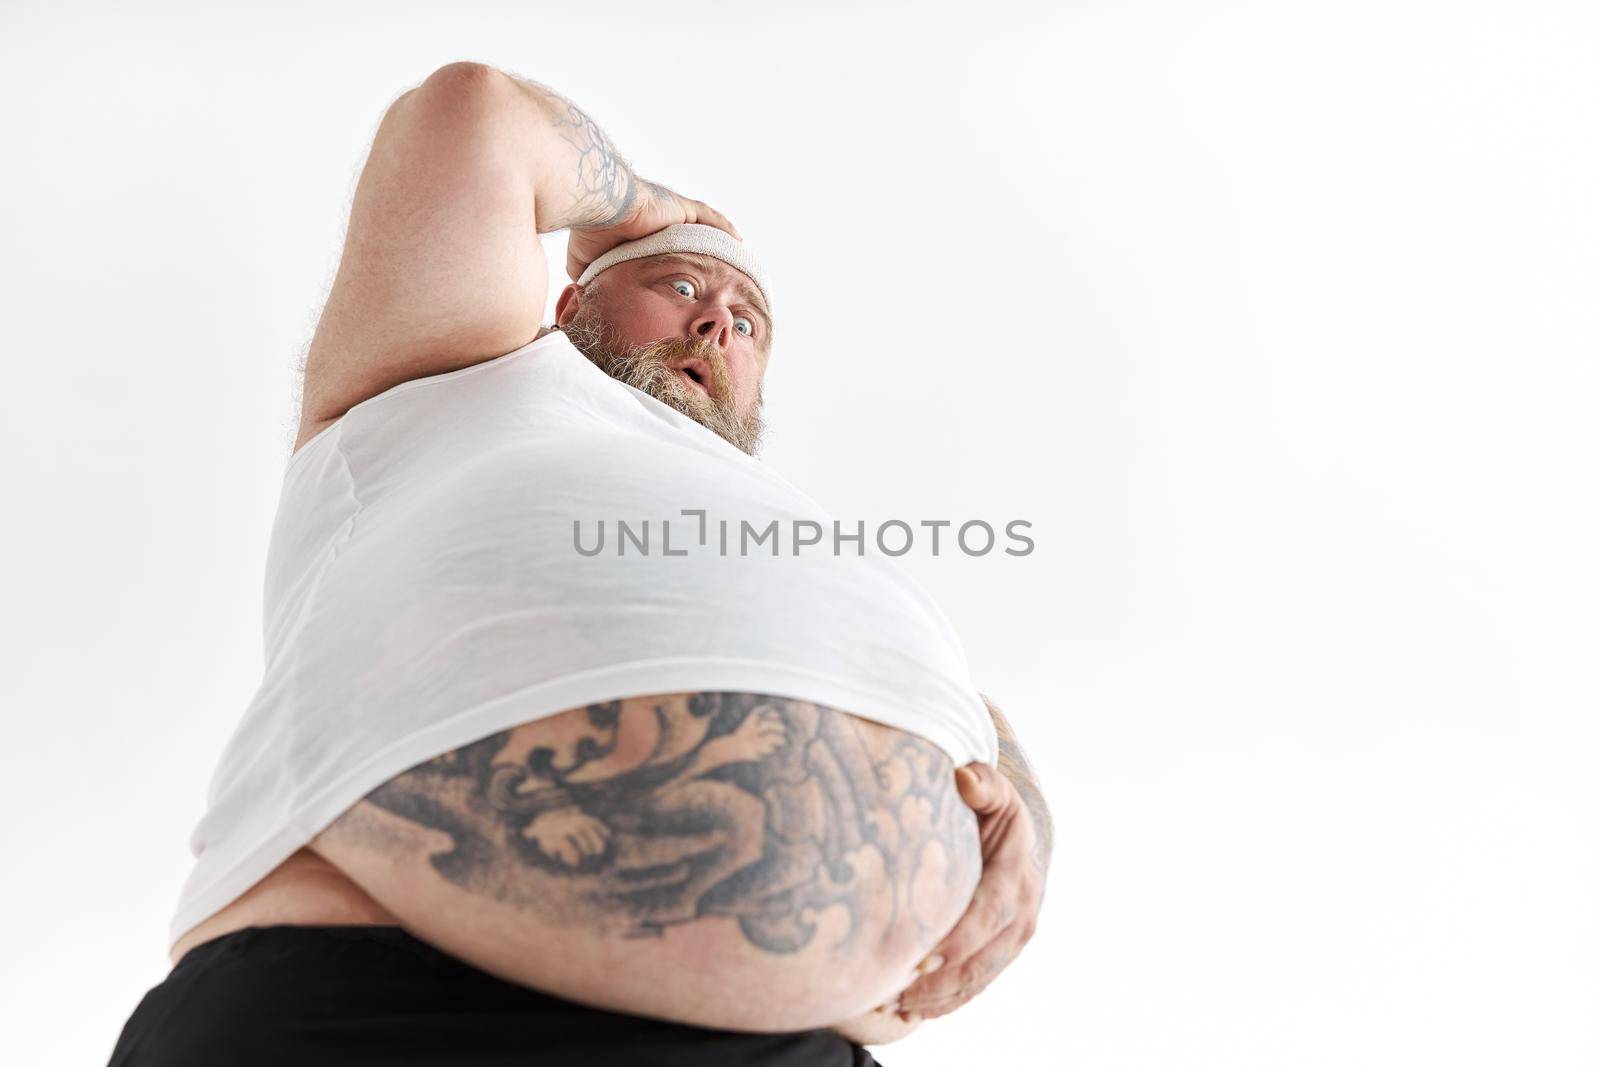 fat man with big belly and tattoes in sports wear is holding his stomach with shocked emotion